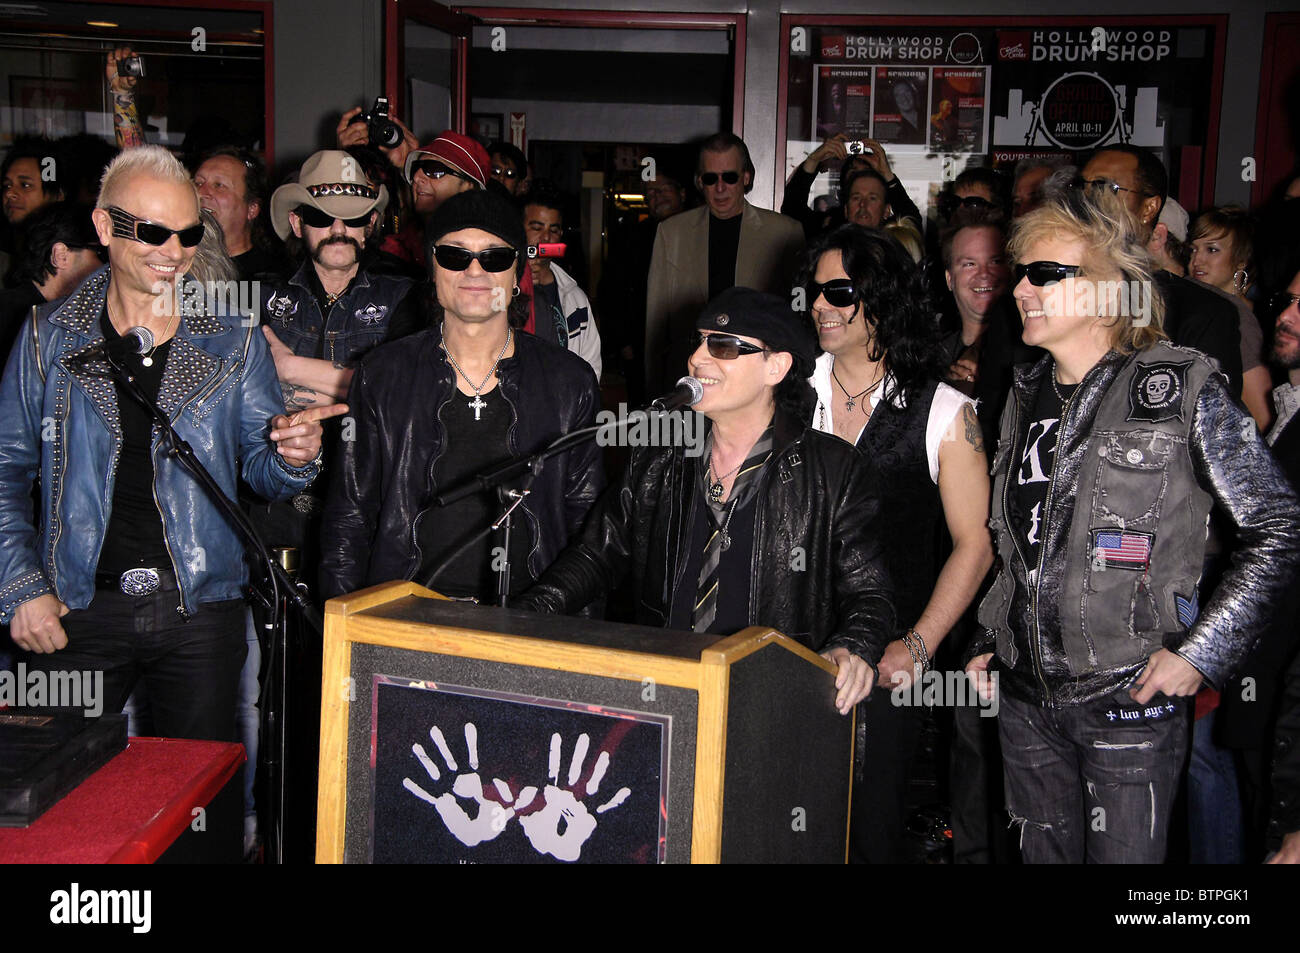 Hollywood's RockWalk Inducts THE SCORPIONS Stock Photo